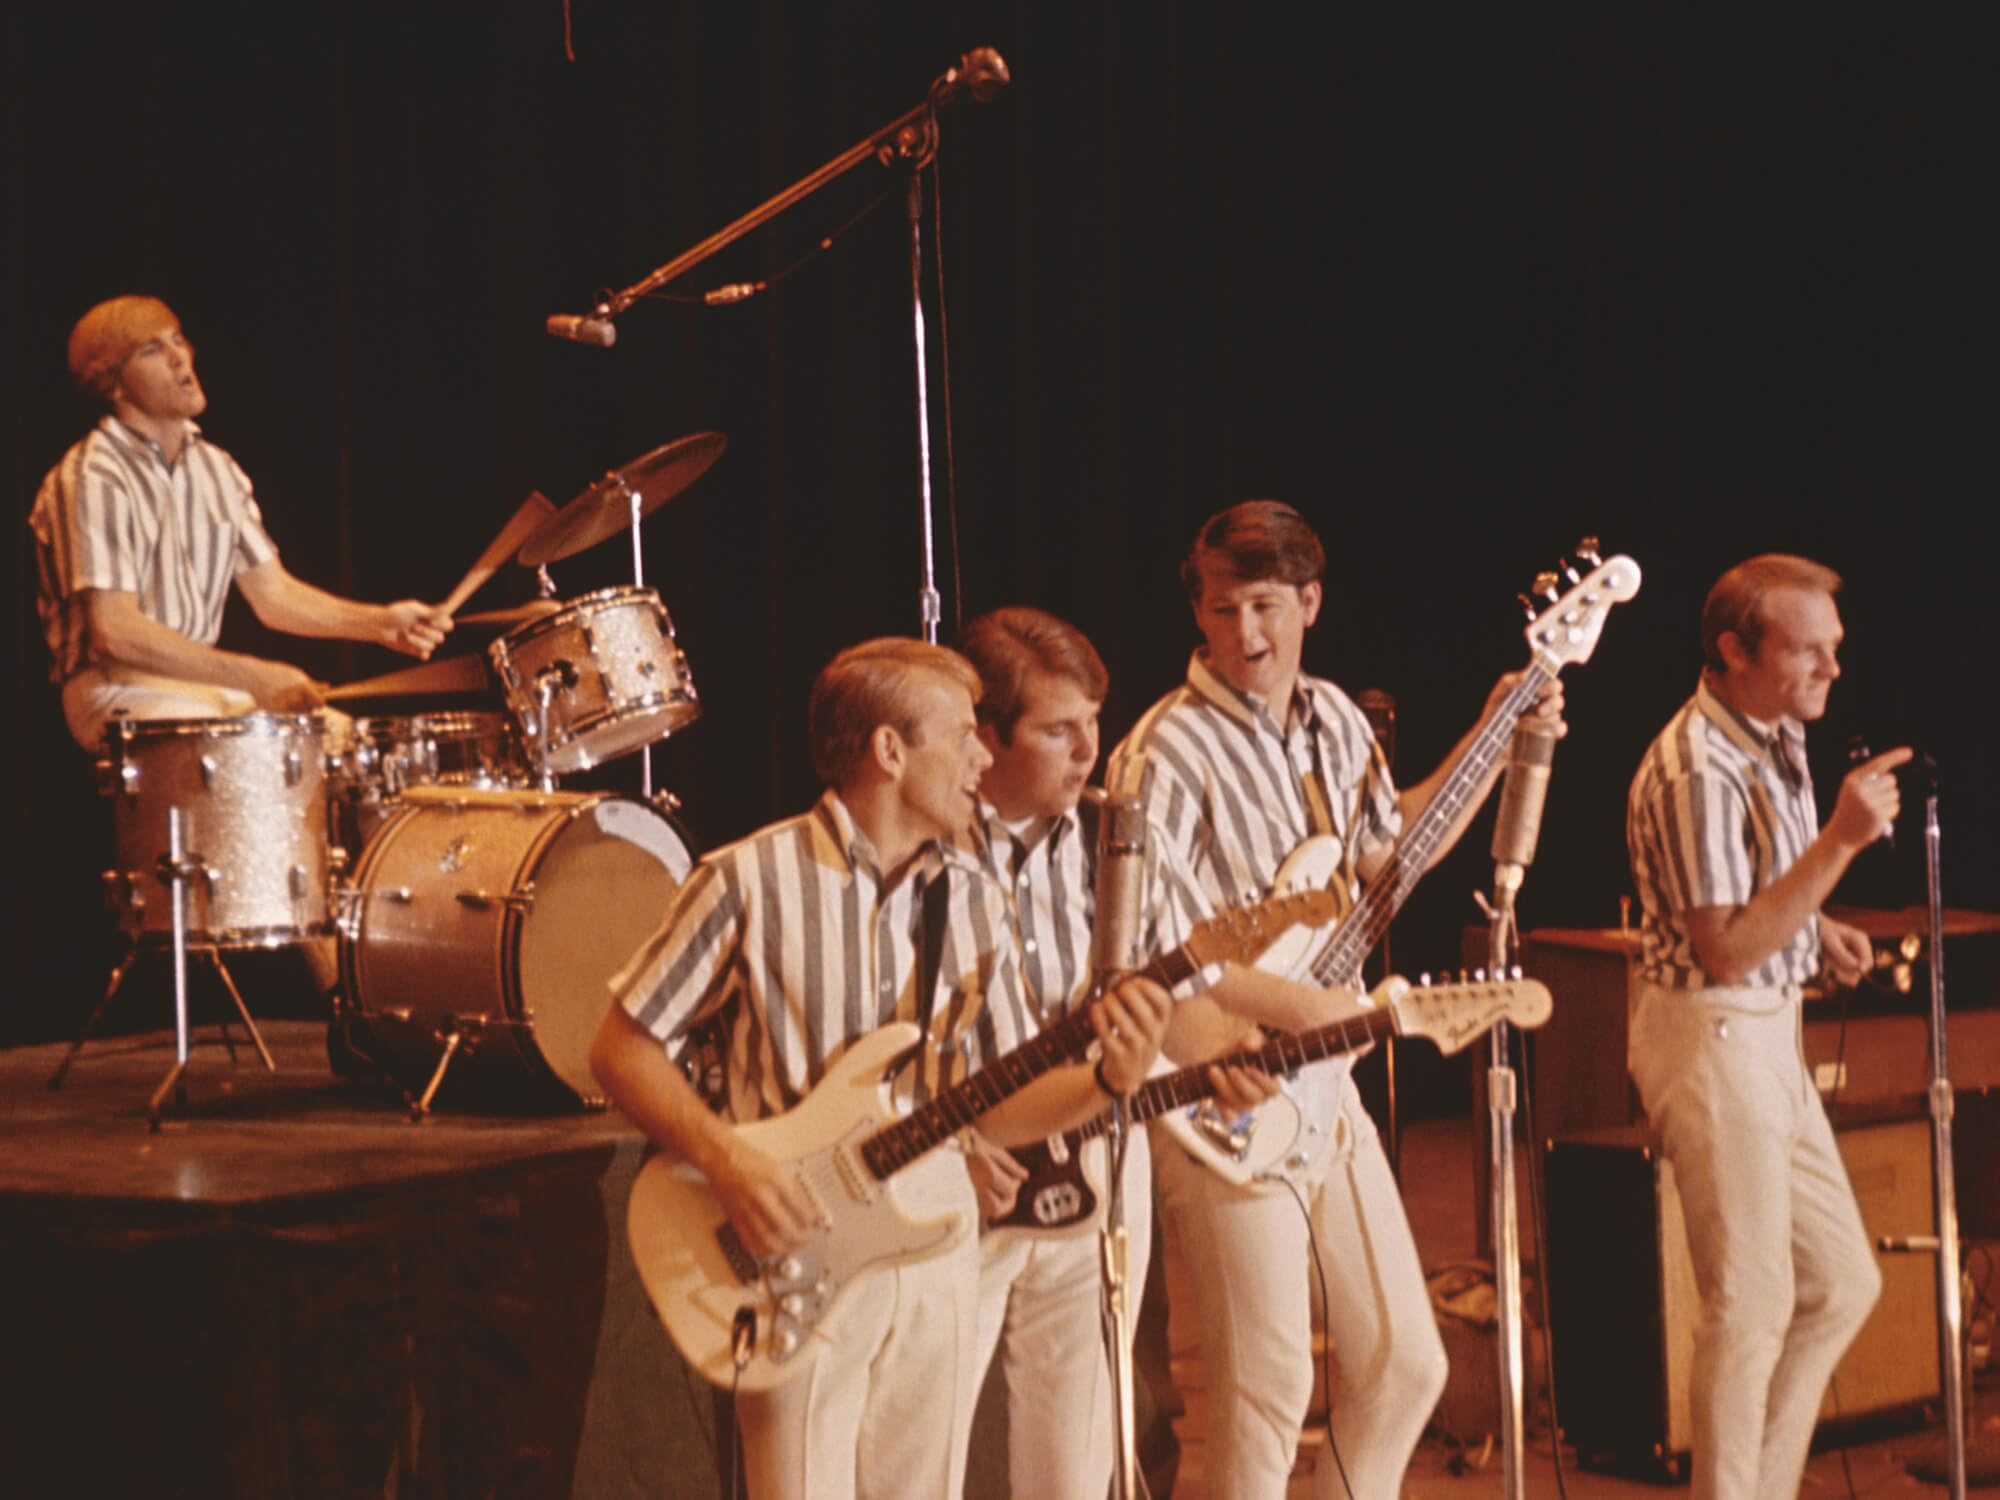 The Beach Boys performing onstage in California, 1964, photo by Michael Ochs Archives/Getty Images